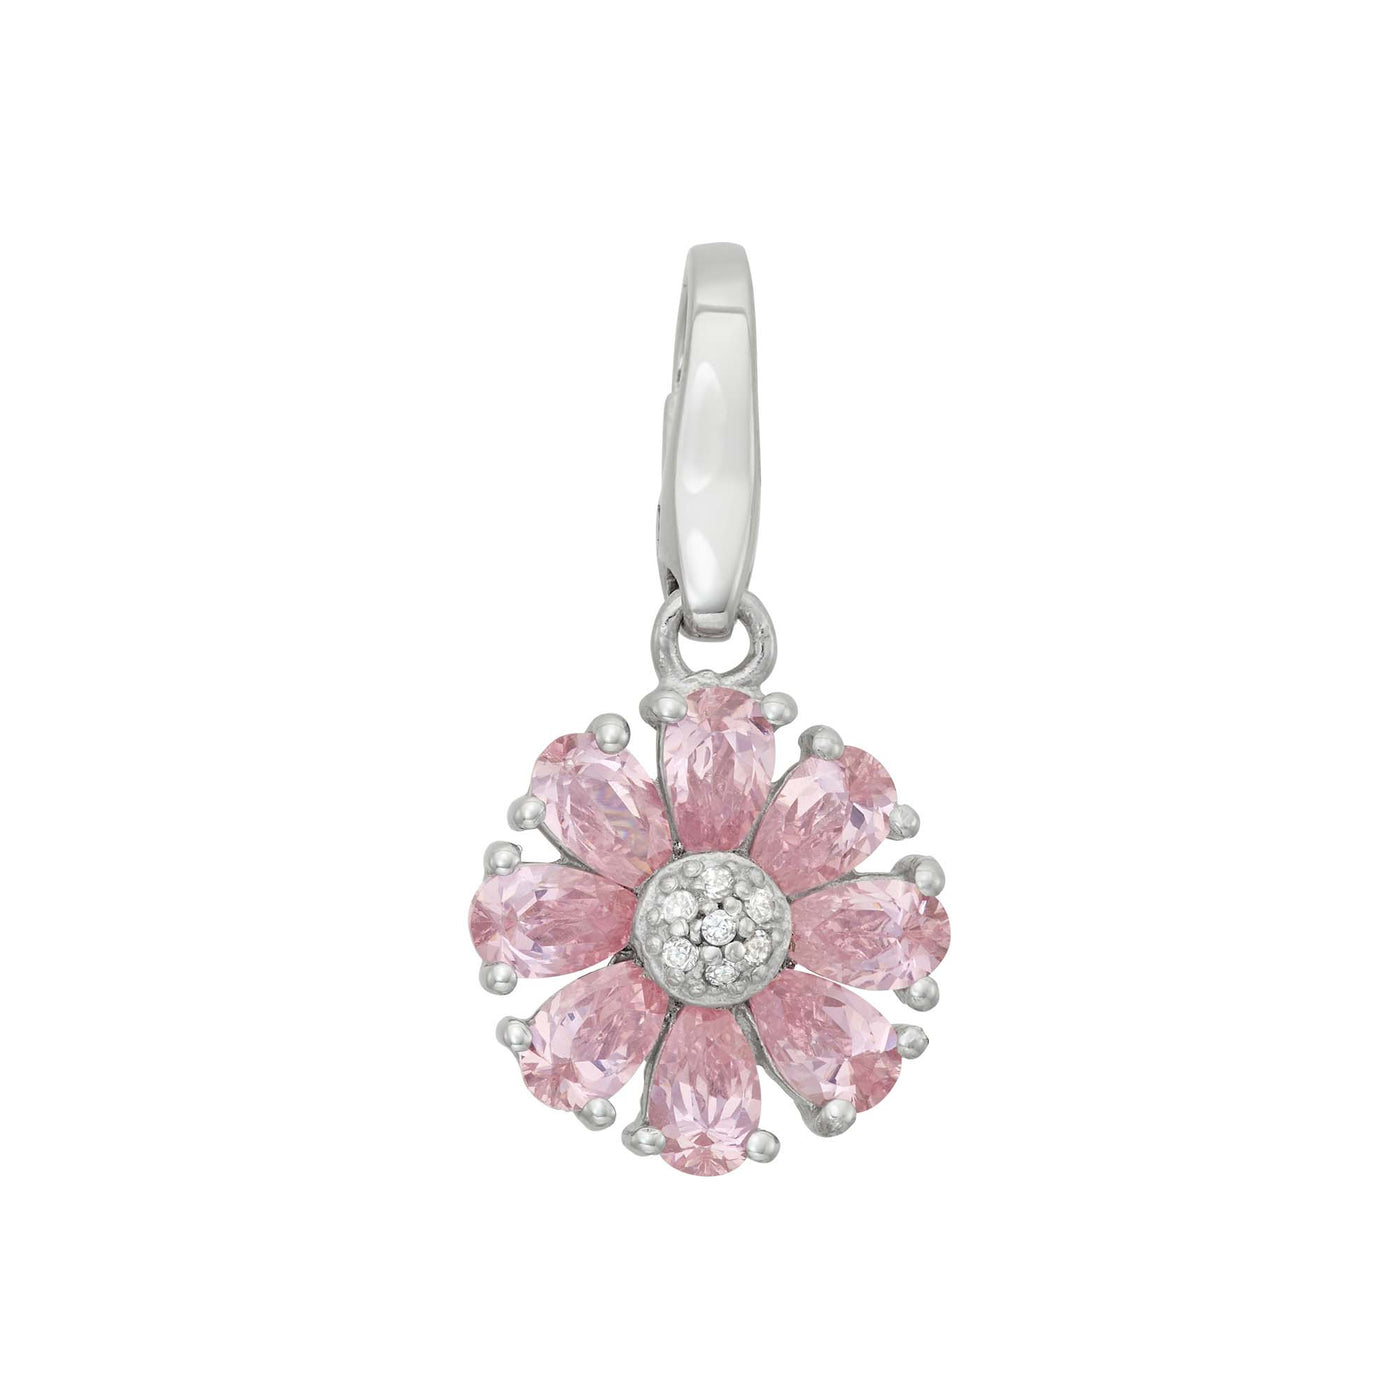 Rebecca Sloane Sterling Silver Pink Flower With White CZ Charm